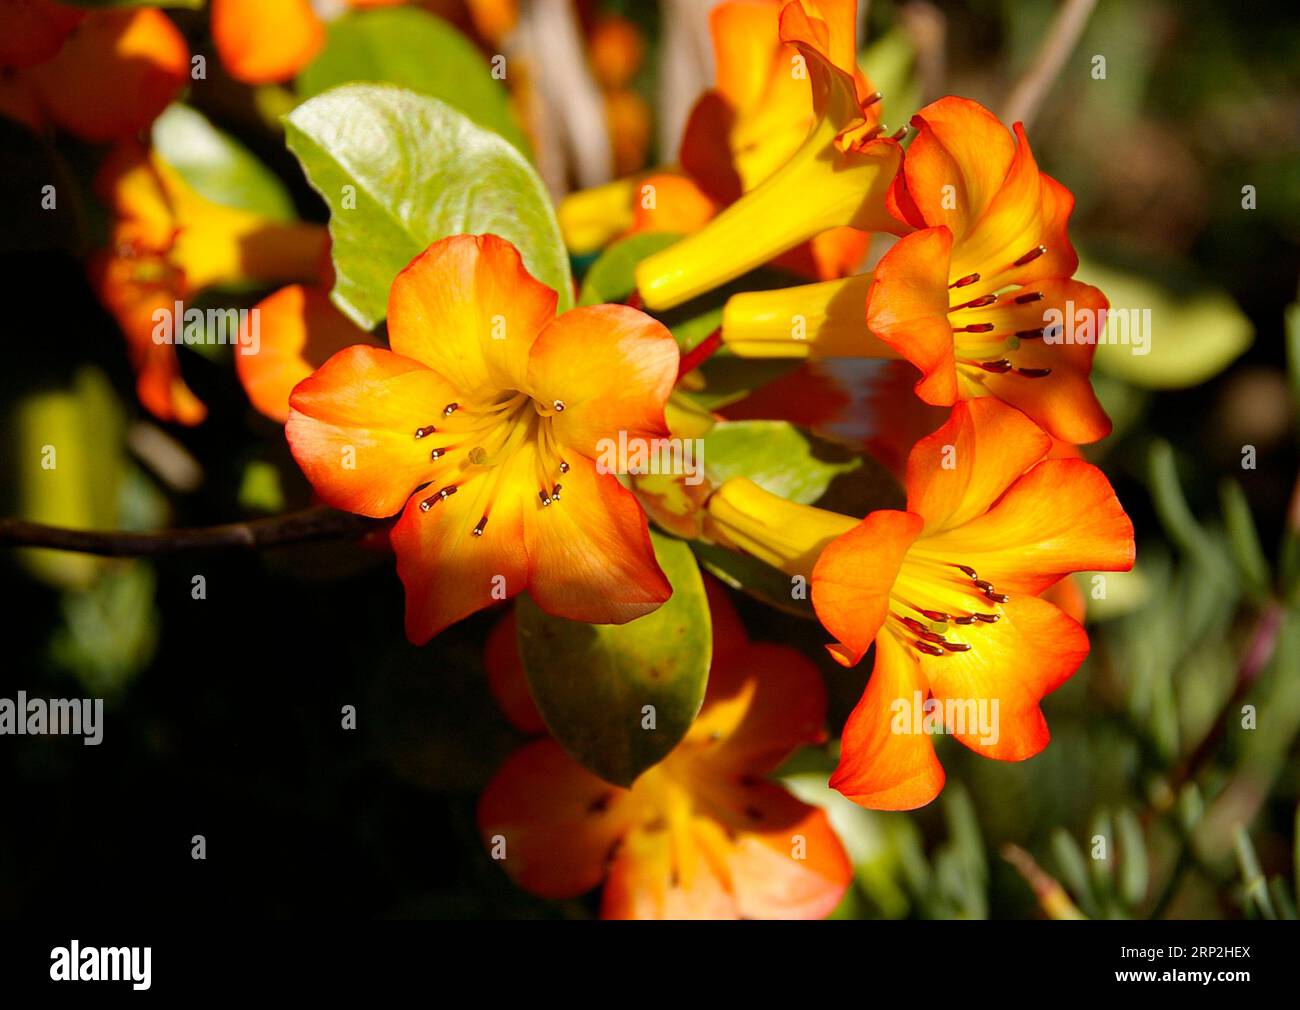 Group of bright yellow and orange flowers of Vireya rhododendron bush in sub-tropical Australian garden, Queensland. Shrub is native to SE Asia. Stock Photo